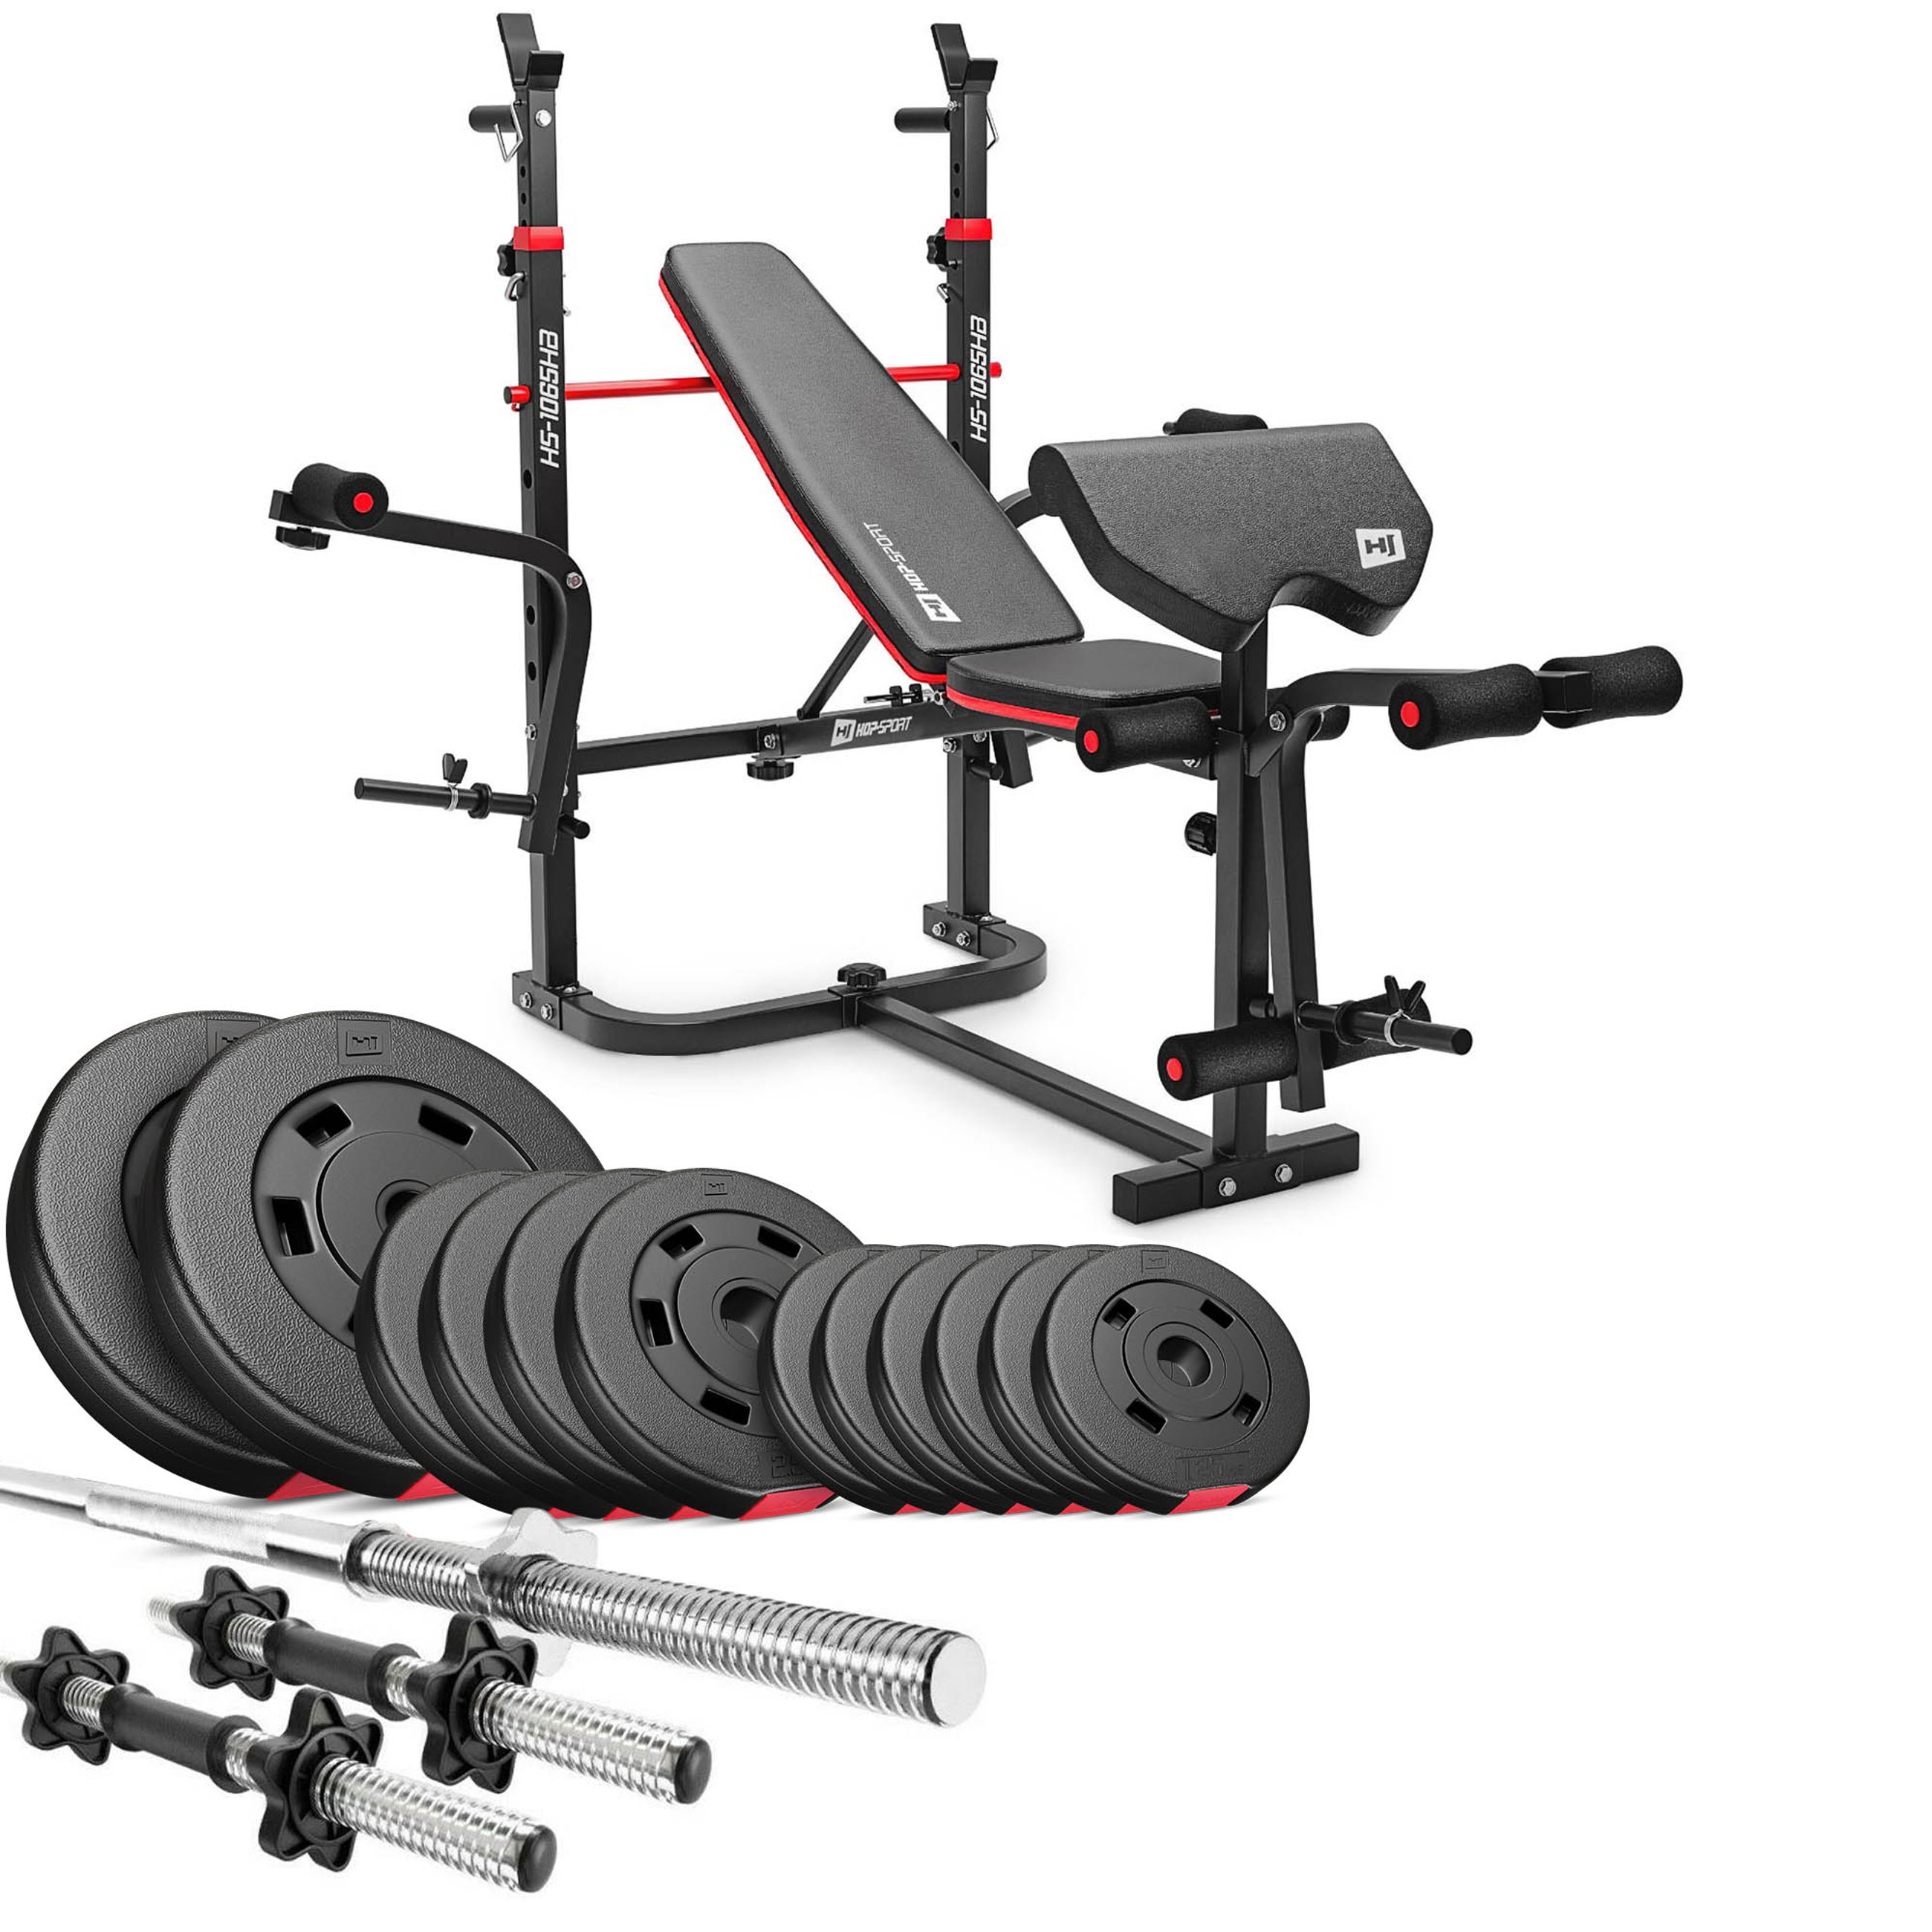 Premium 38 kg Barbell Set with HS-1065 Weight Bench